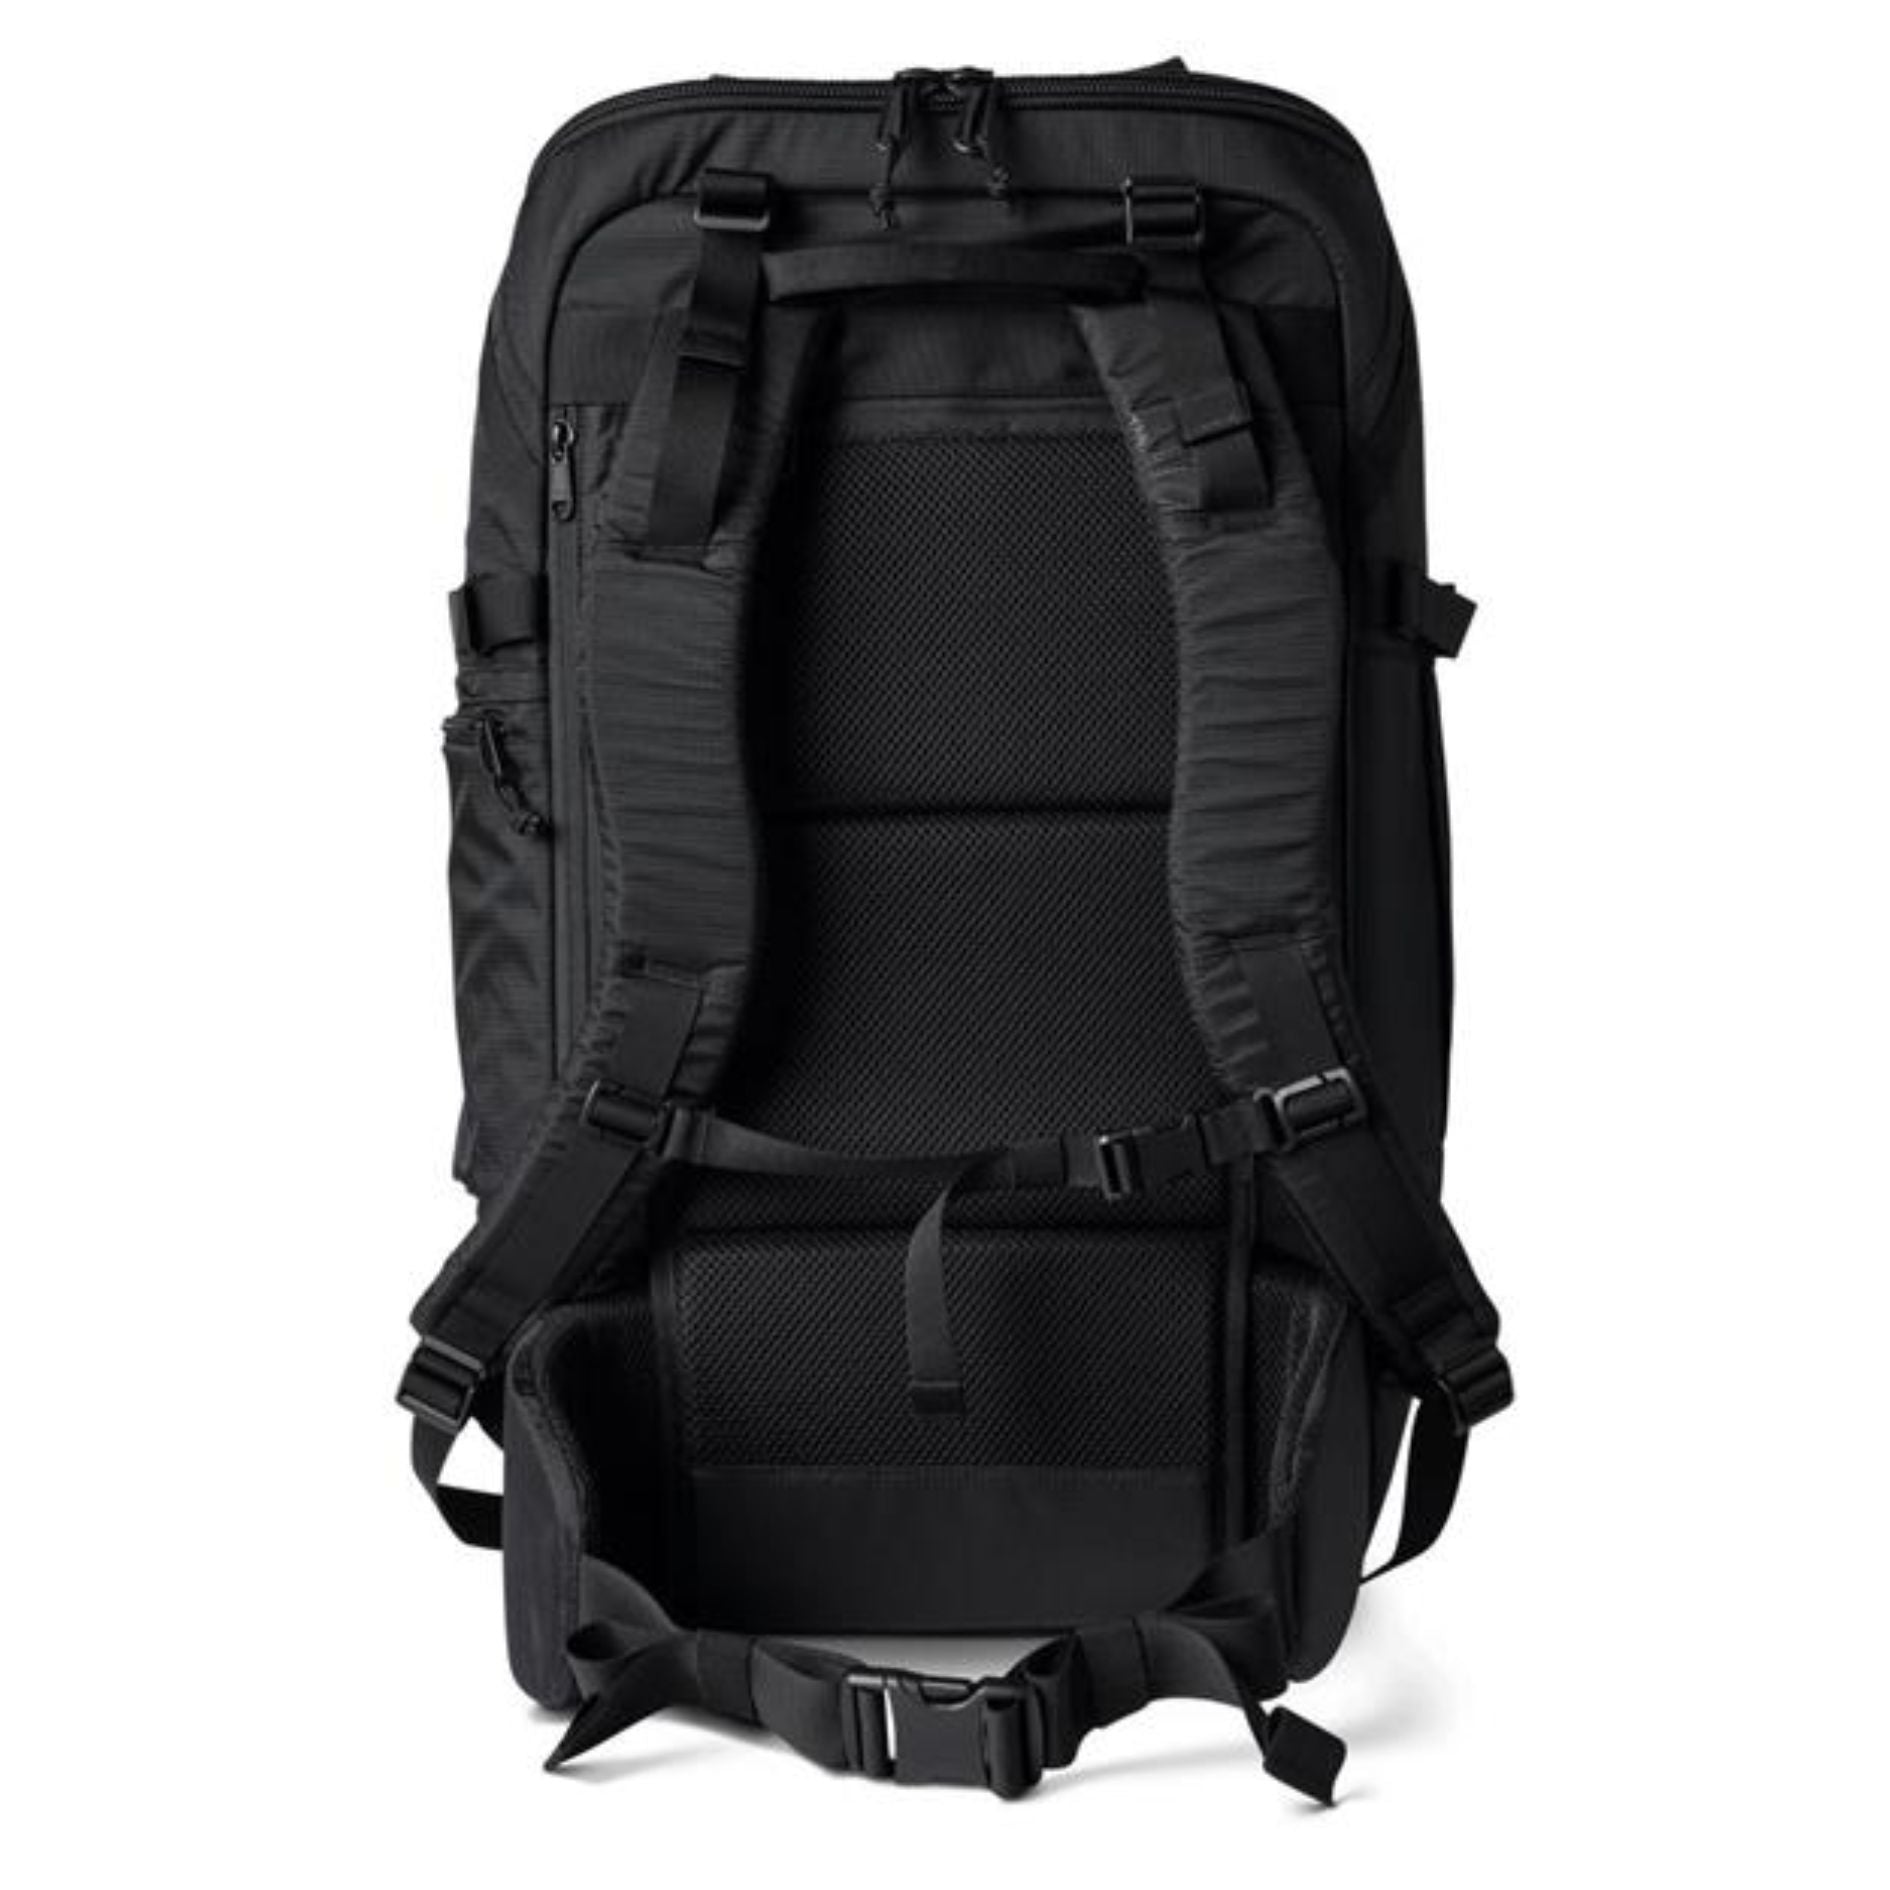 Accomplice Mule 45L Backpack